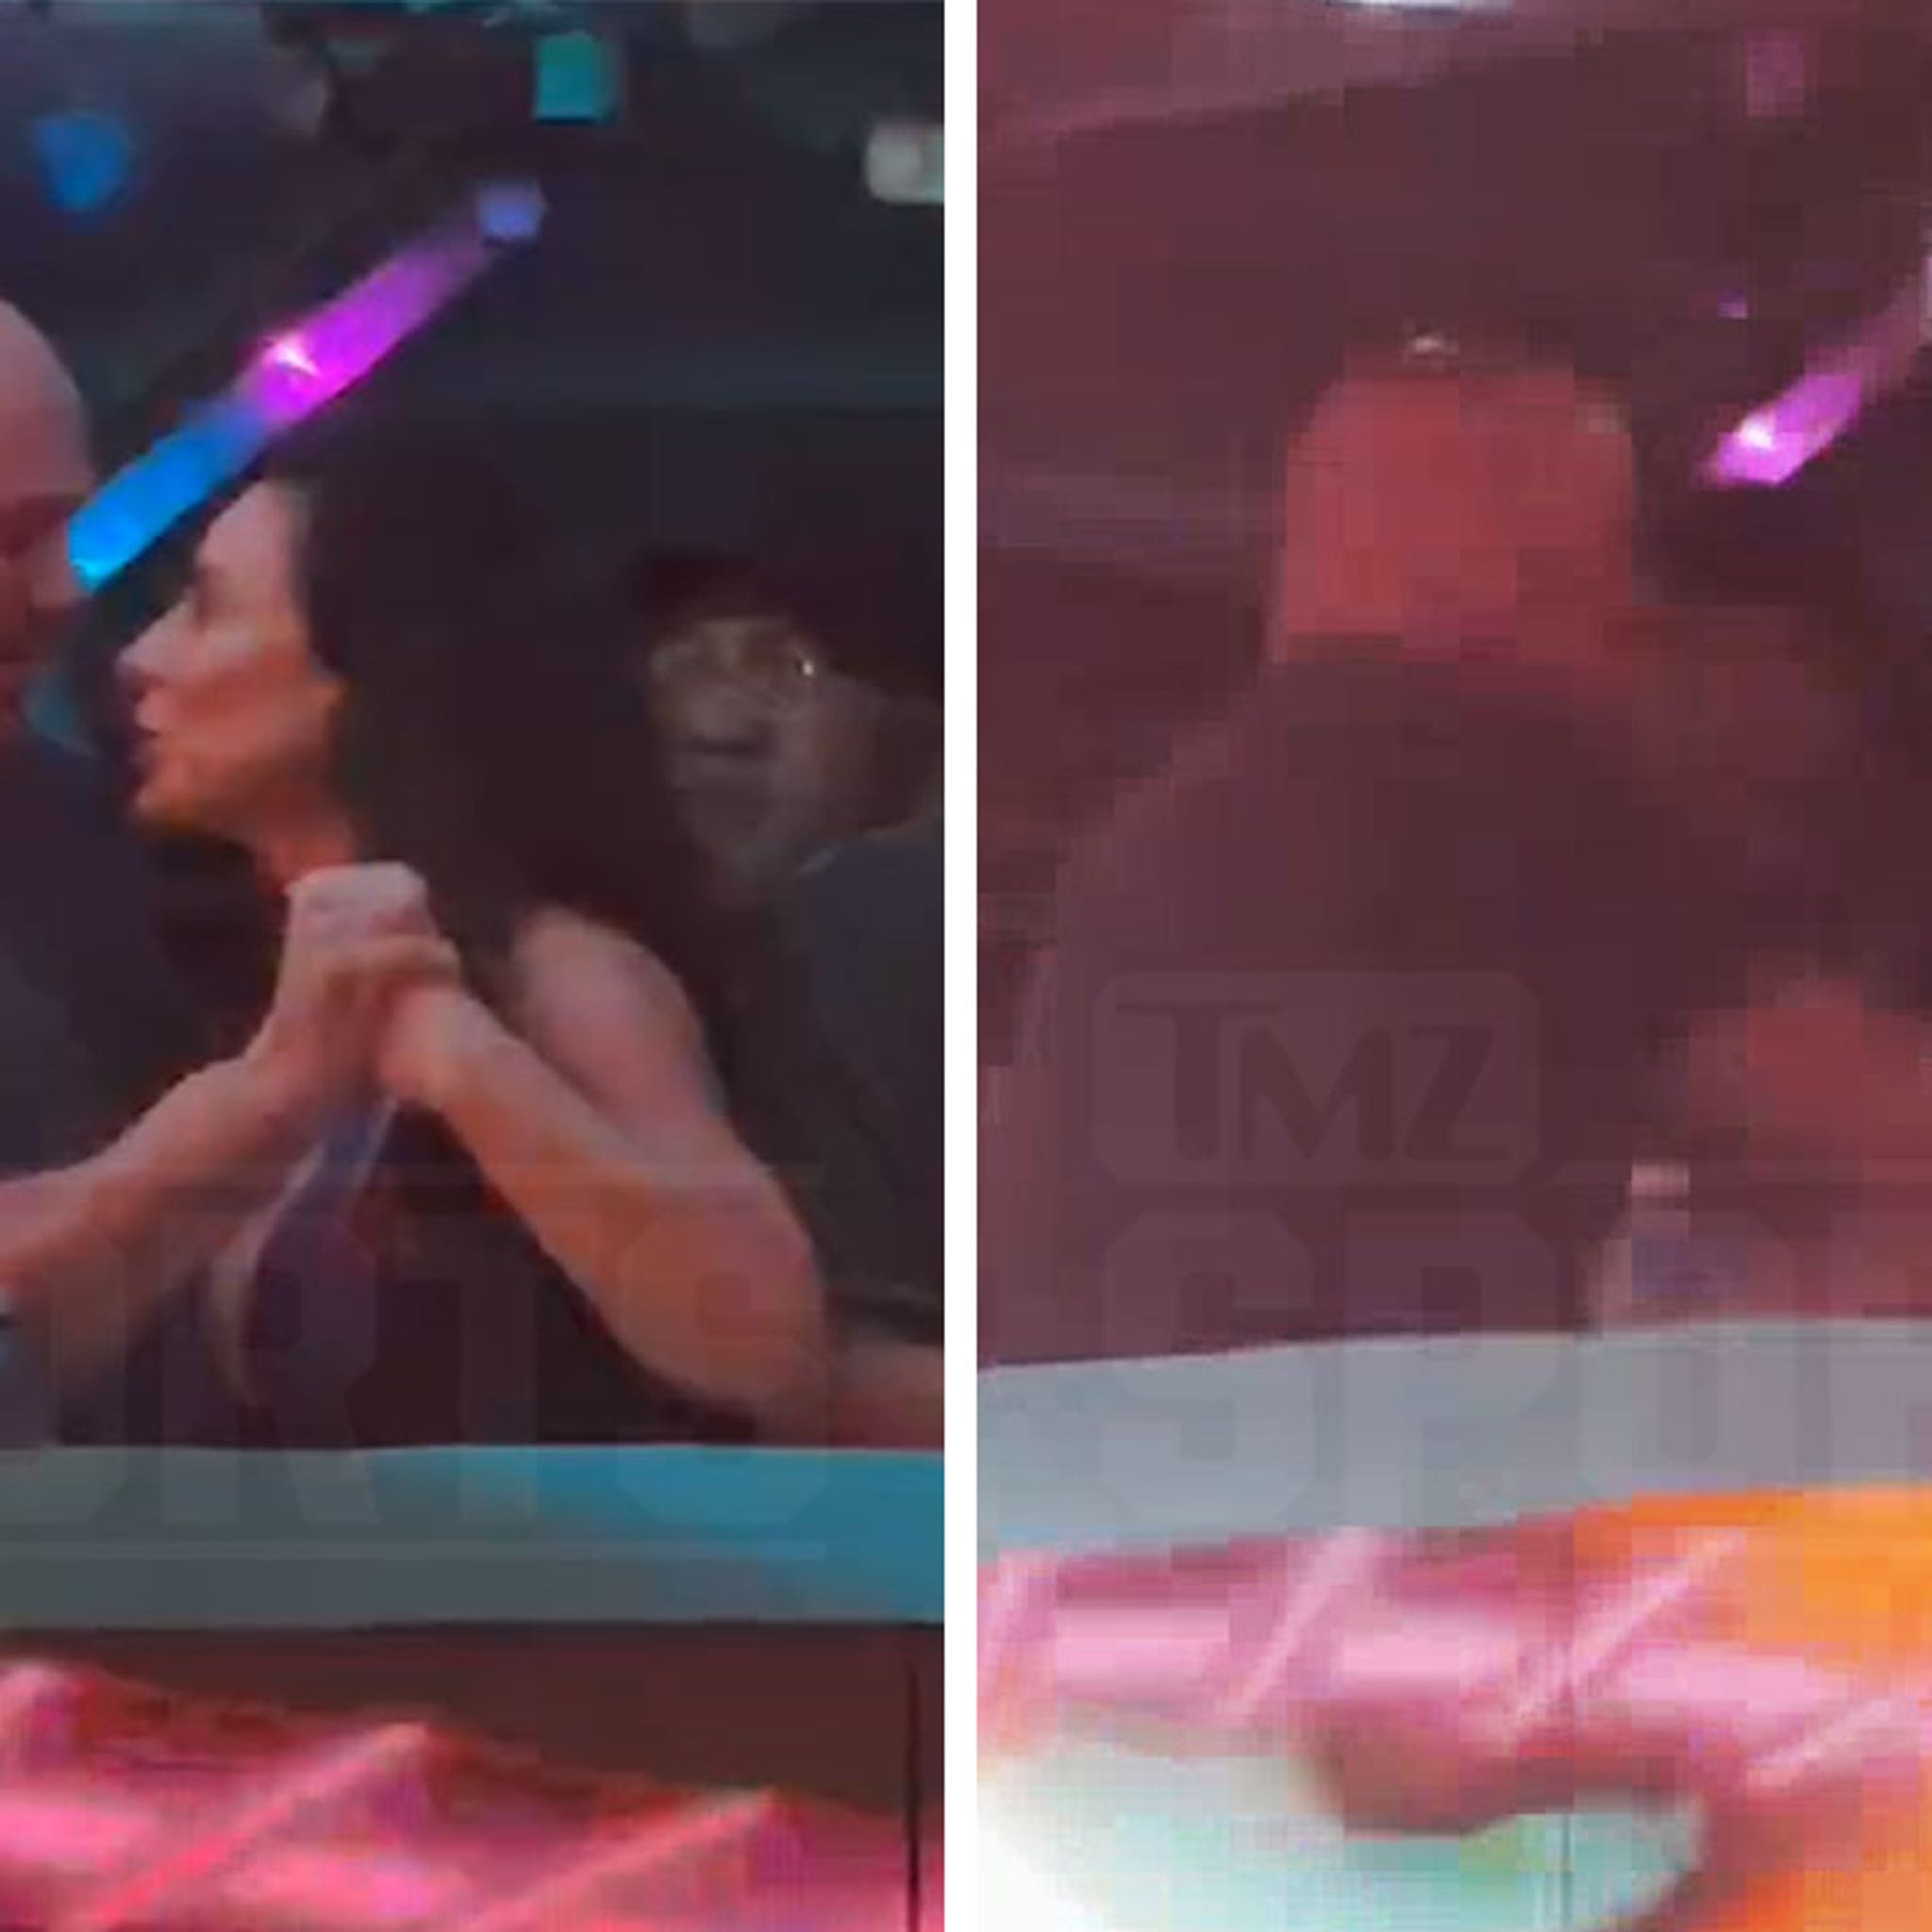 Dana White and Wife, Anne, in Drunken Nightclub Fight on New Years pic